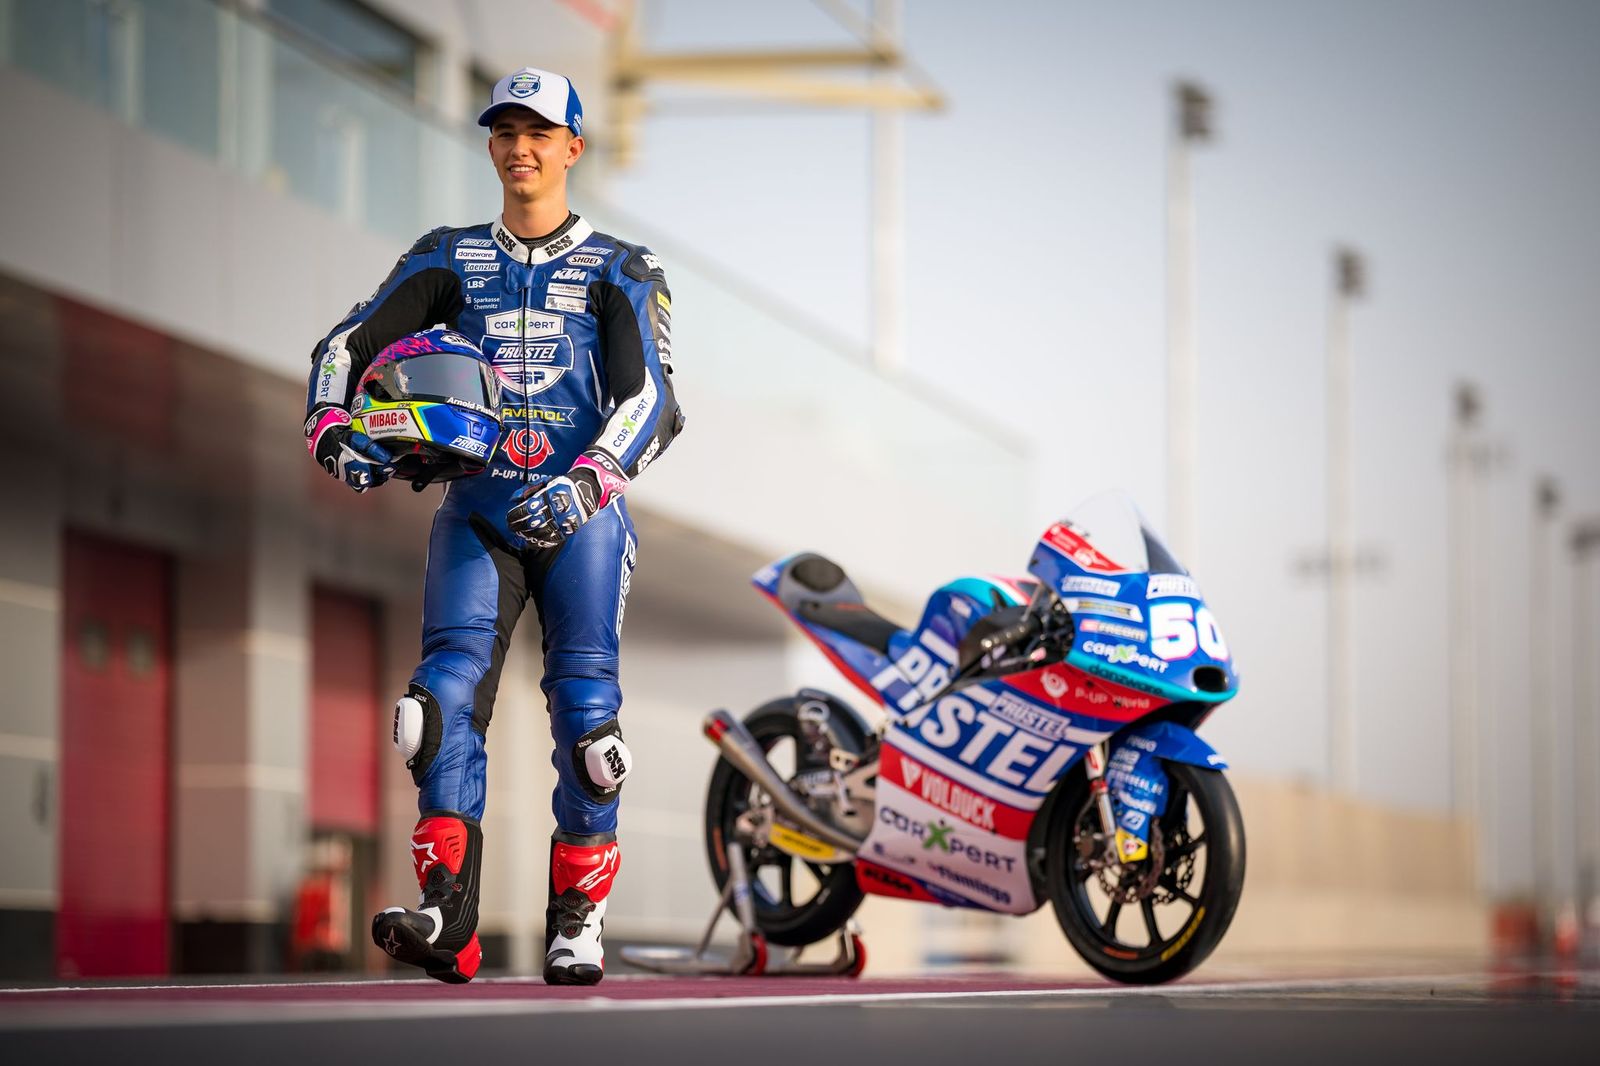 Jason Dupasquier walks in front of his bike during a PruestelGP photo shooting at Losail Circuit on April 1, 2021, in Doha, Qatar | Photo: Steve Wobser/Getty Images